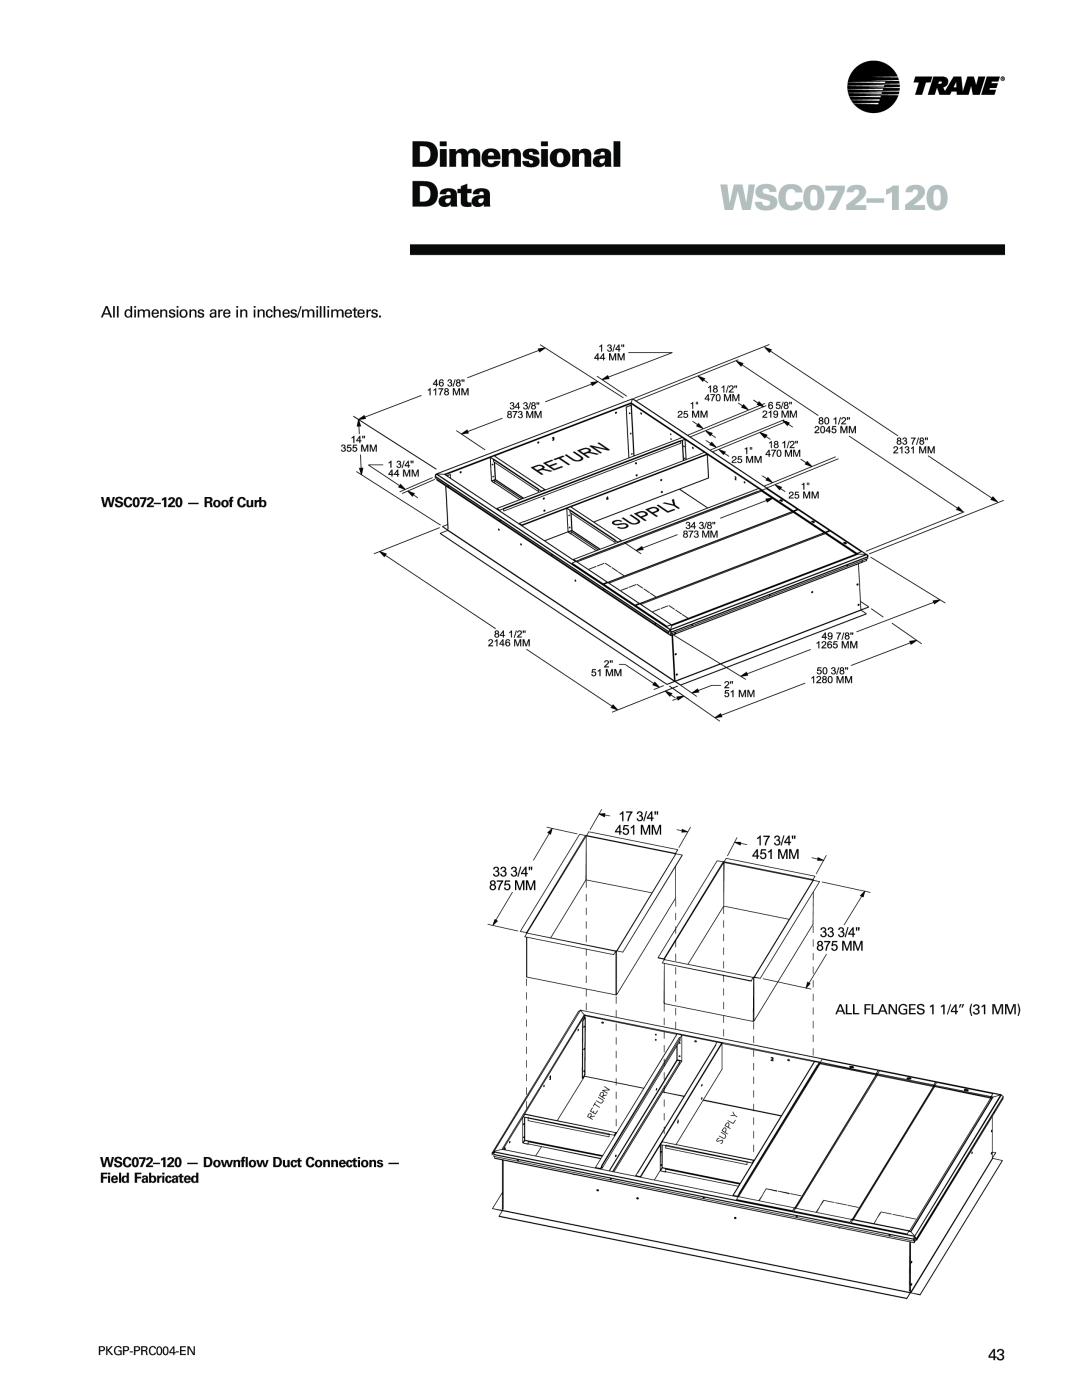 Trane WSC060-120 manual Dimensional, DataWSC072-120, WSC072-120- Roof Curb, WSC072-120- Downflow Duct Connections 